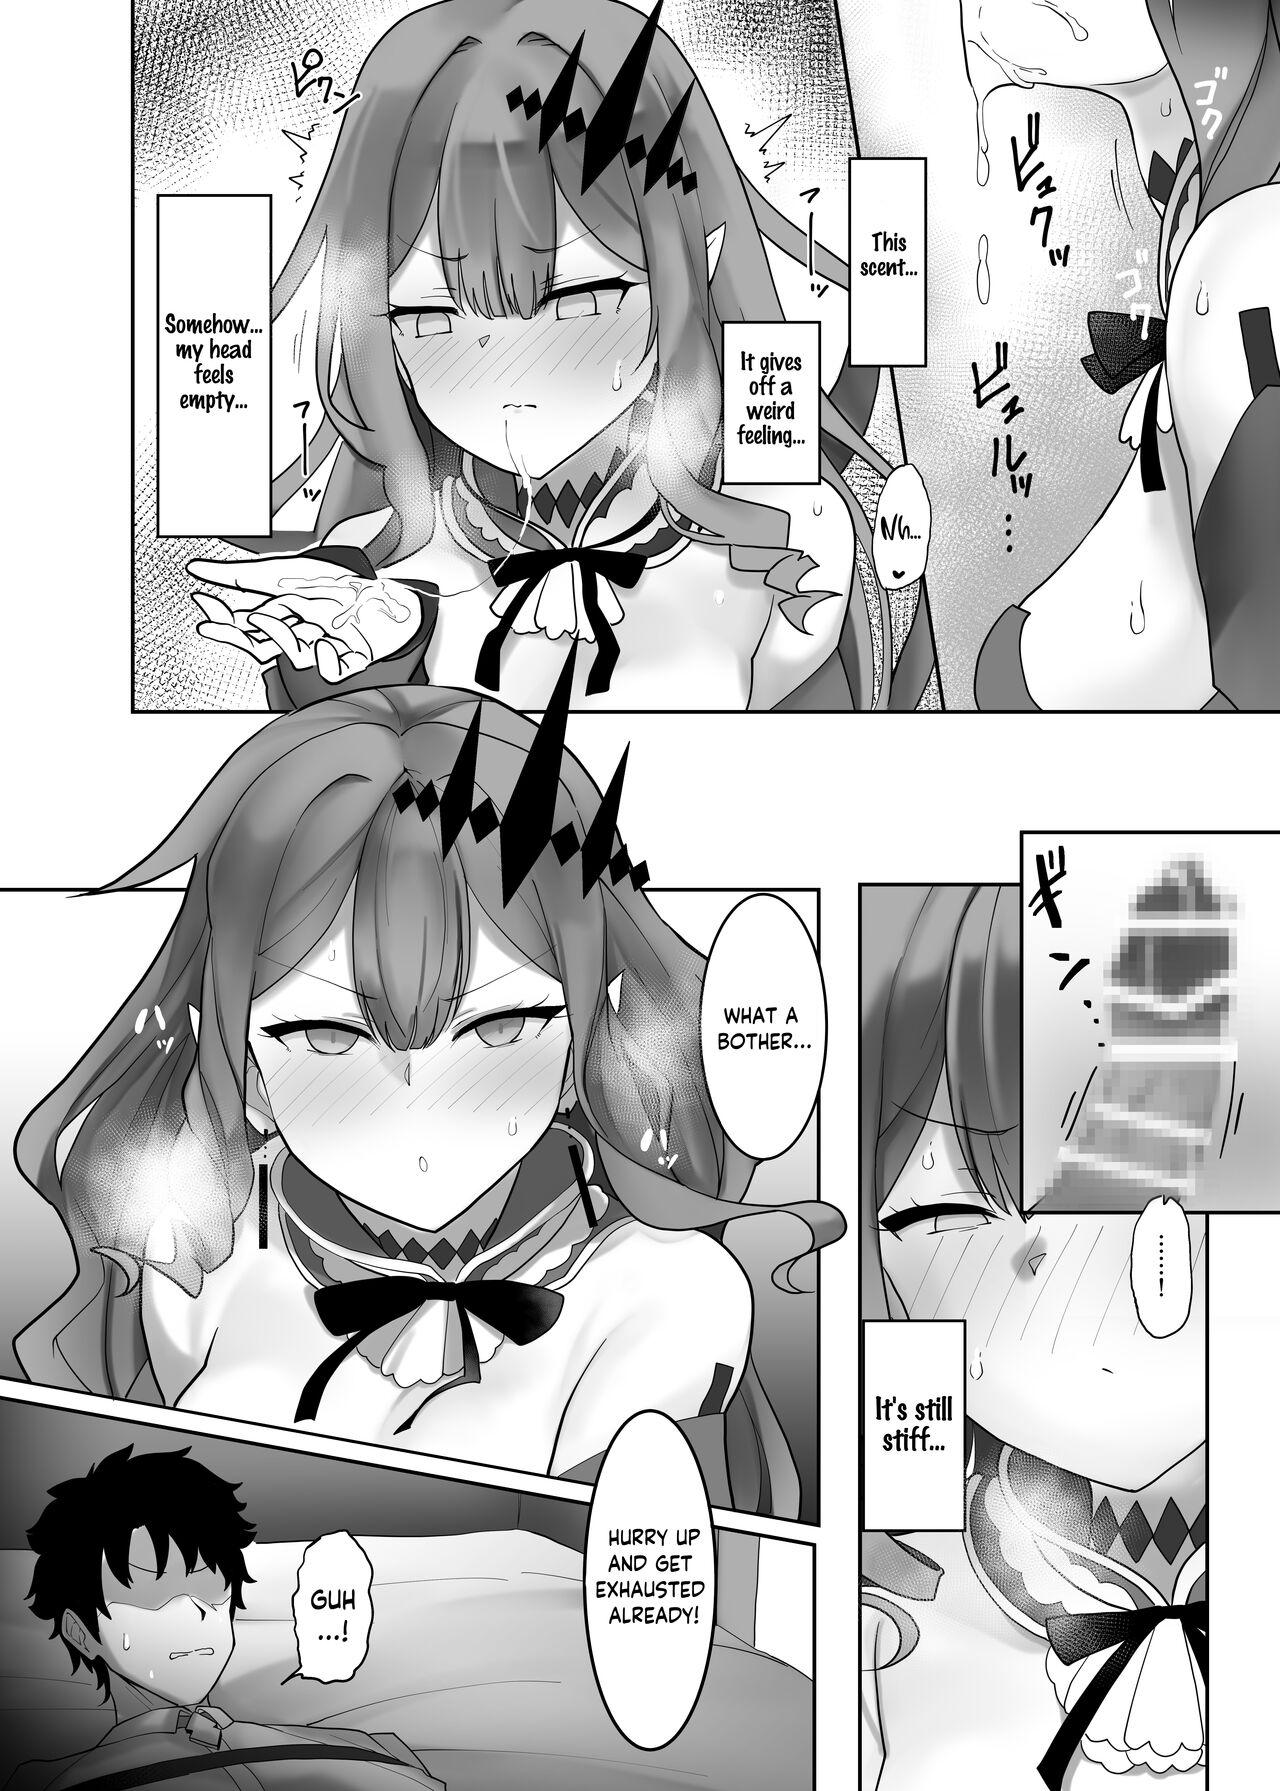 Pussylick Making Fairy Knight Tristan Understand - Fate grand order Dicks - Page 7